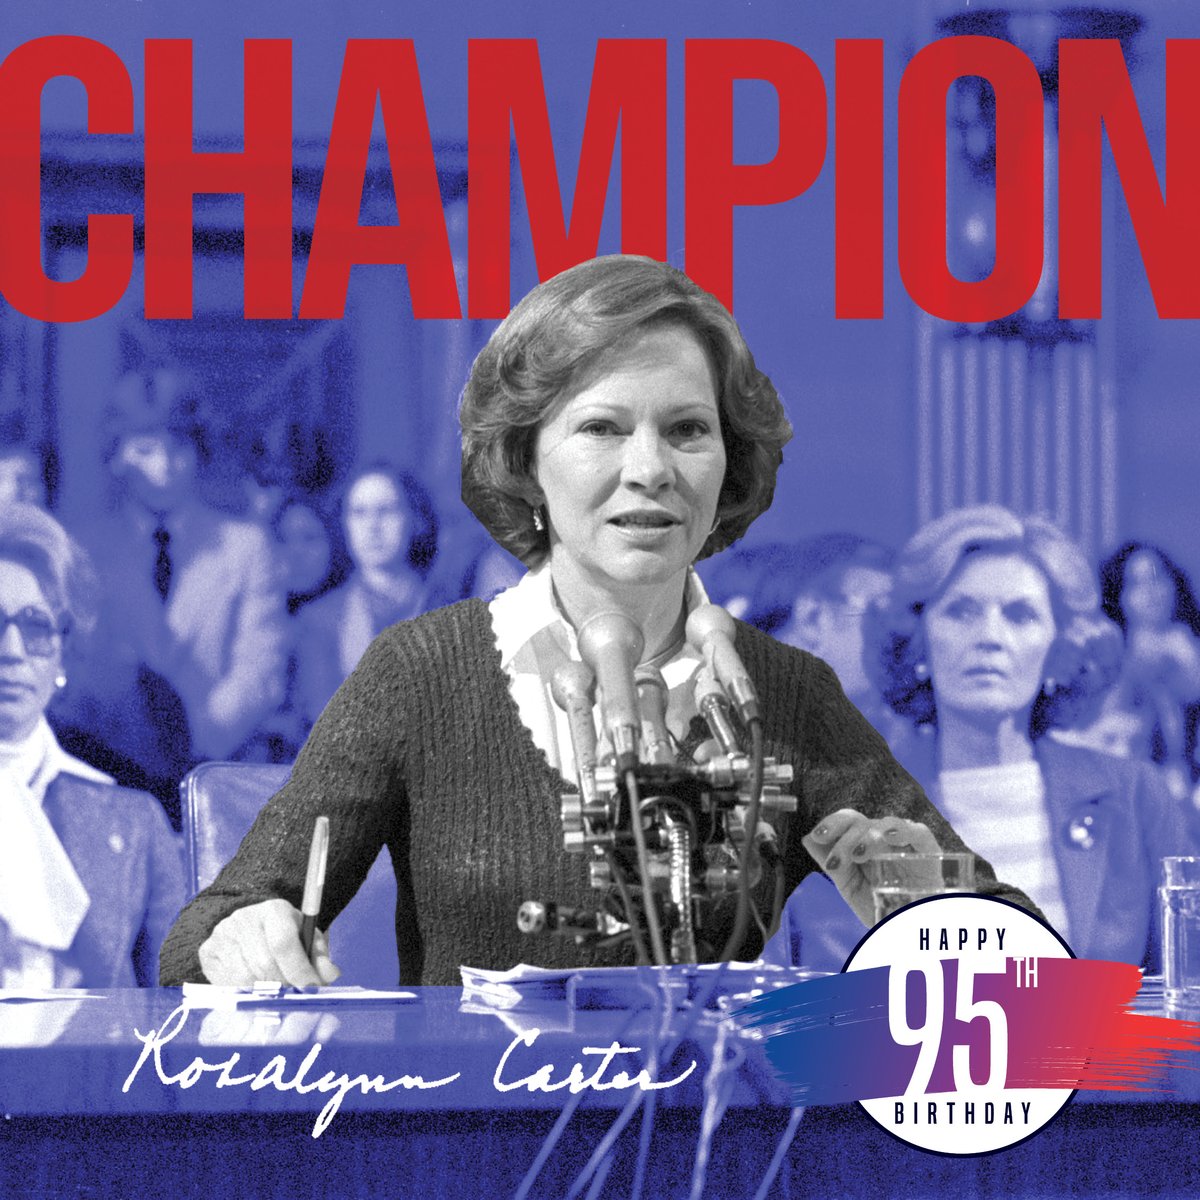 DYK that Rosalynn Carter has been a #mentalhealth trailblazer for 50+ years? Leading up to her #95thBirthday, we commend her continued impact at #TheCarterCenter, where she created the Center's Mental Health Program and founded @CarterFellows. #MrsCarterMakingHistory.